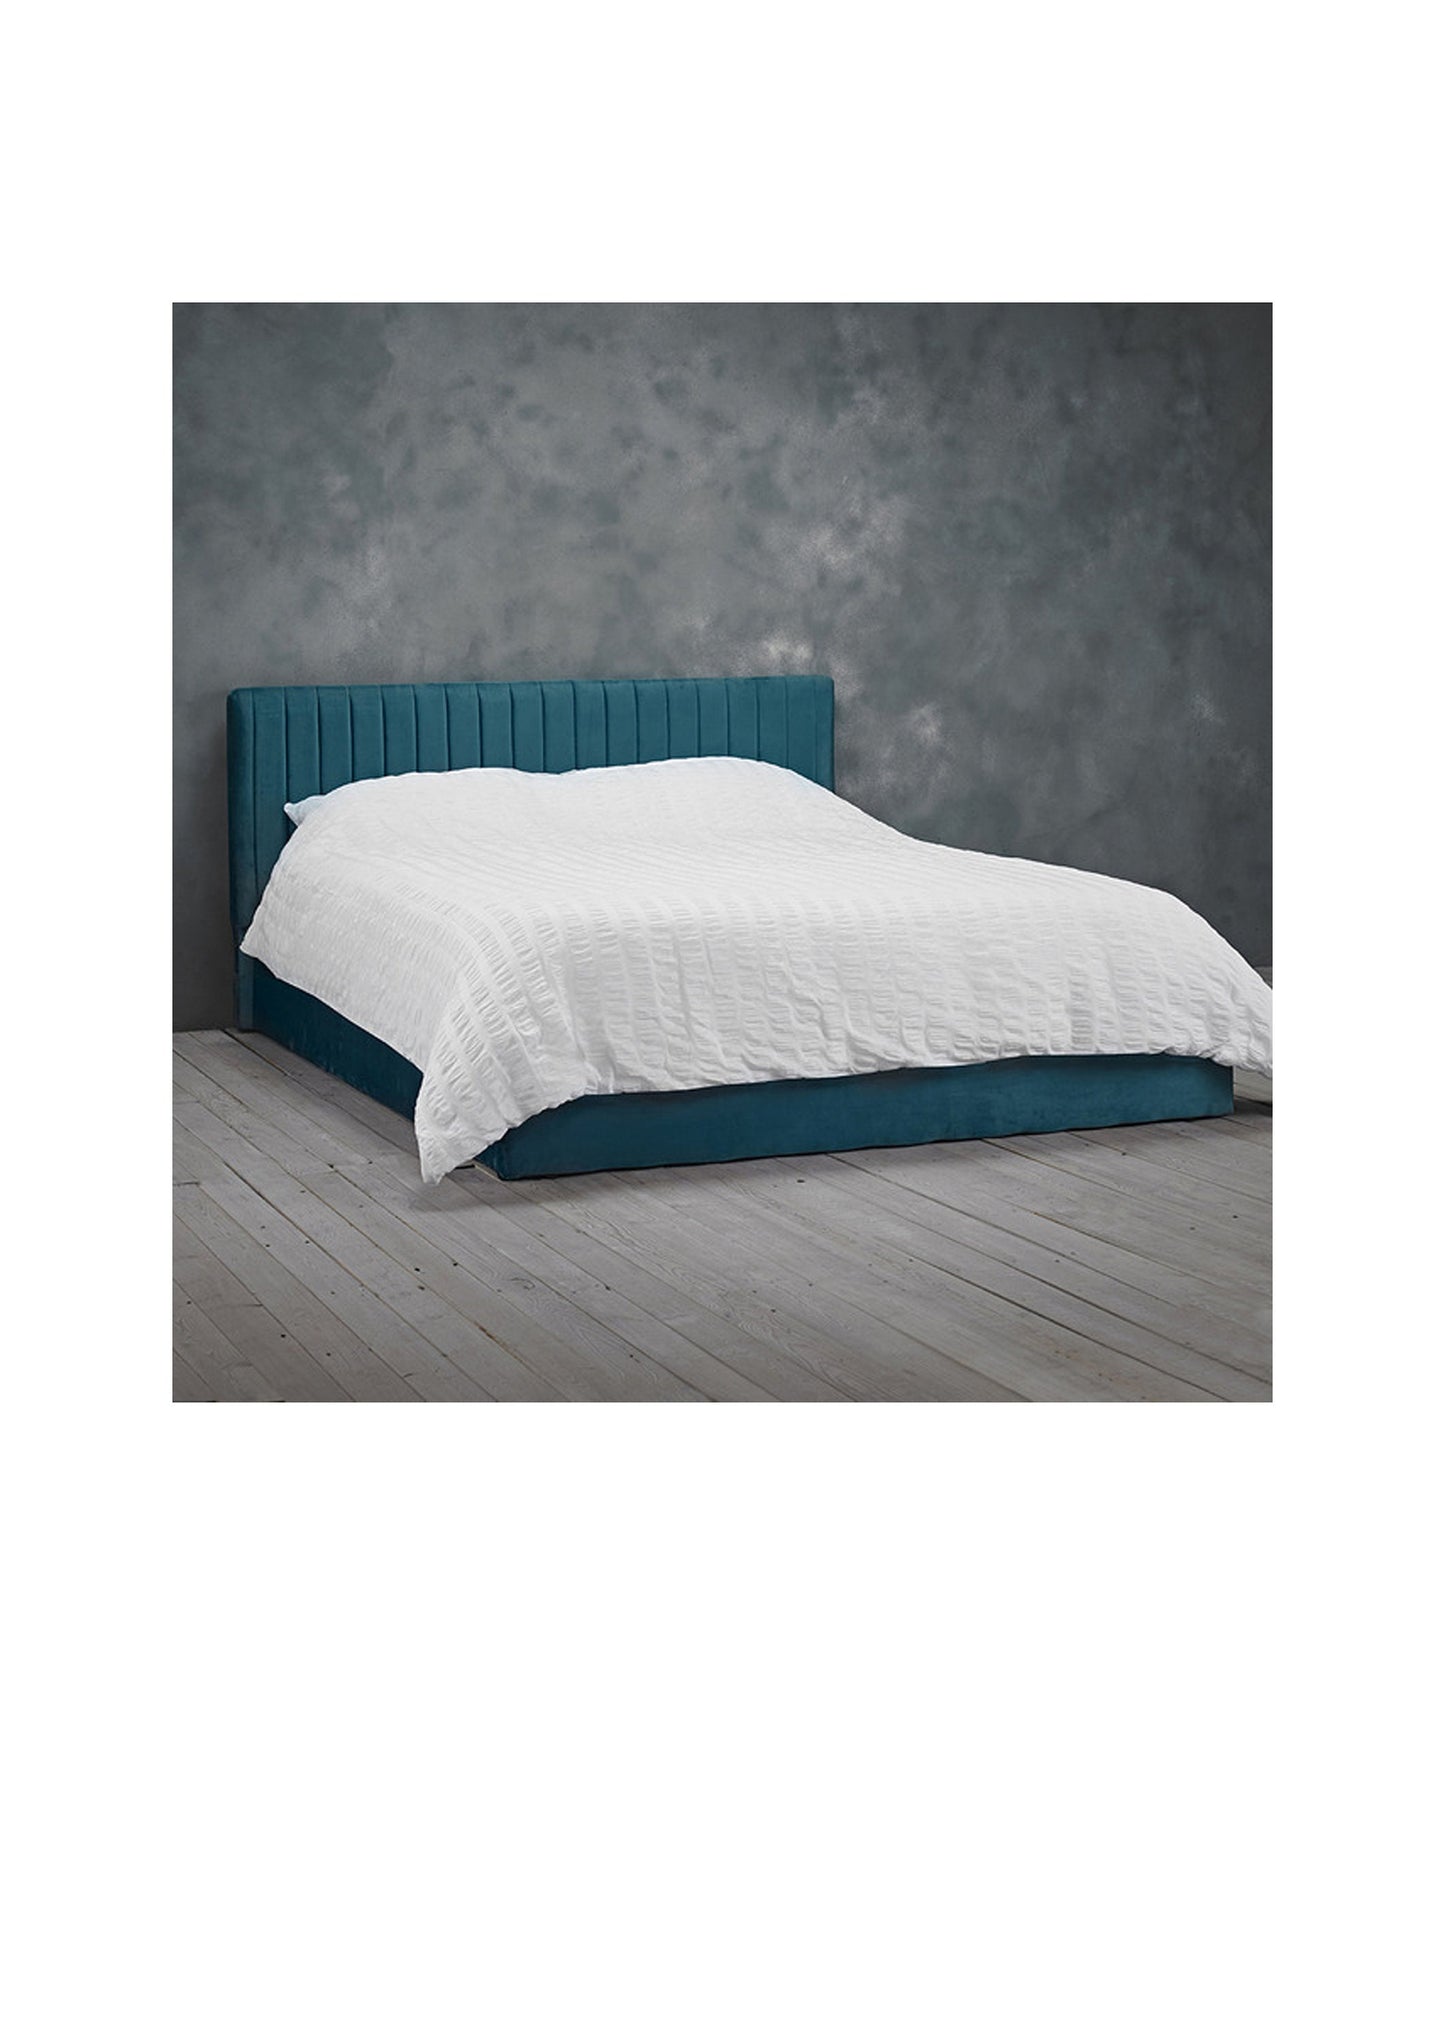 NEW Velvet Ottoman Bed Kingsize with Storage. Available in 3 colours Teal ,Grey, Mustard